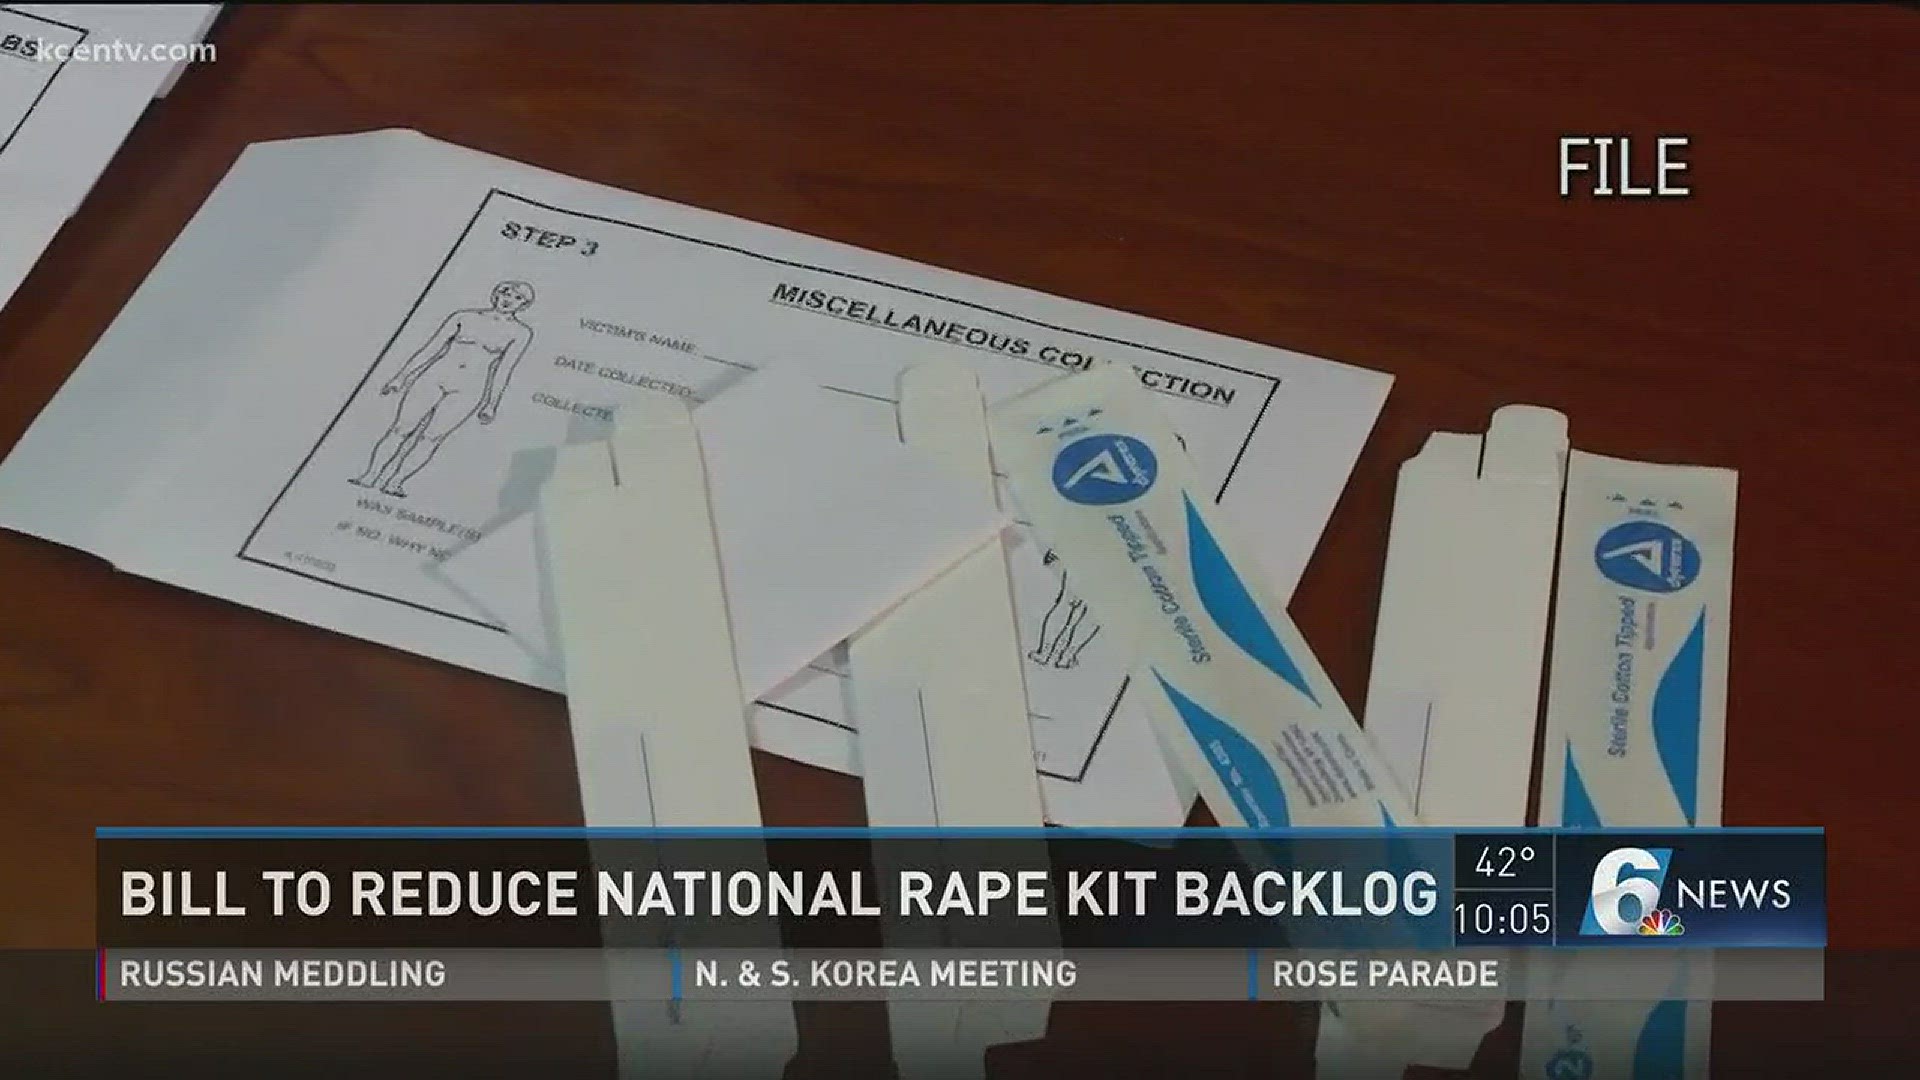 President Trump signed into law a bill to reduce the nationwide rape kit backlog.